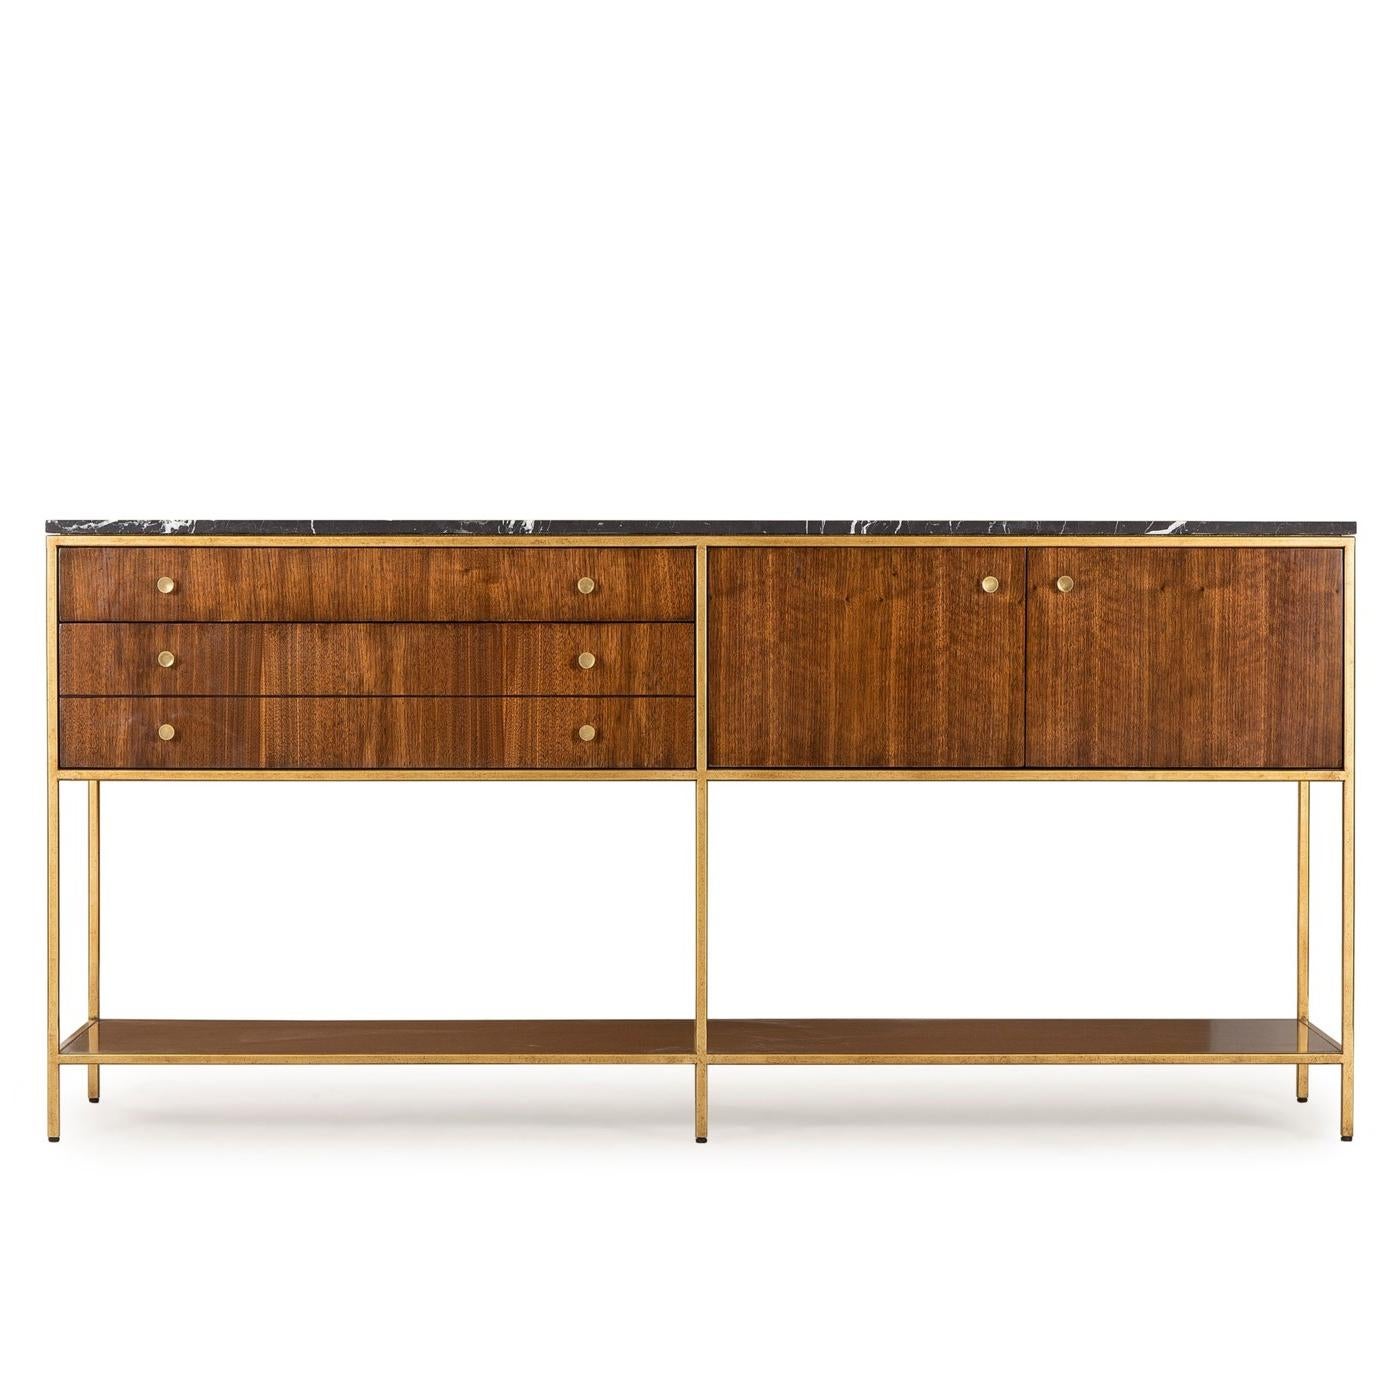 Sideboard Carolina with structure in metal in brass
finish with solid oak and walnut structure. With black
marquina marble top. Sideboard including 3 drawers
and two doors.